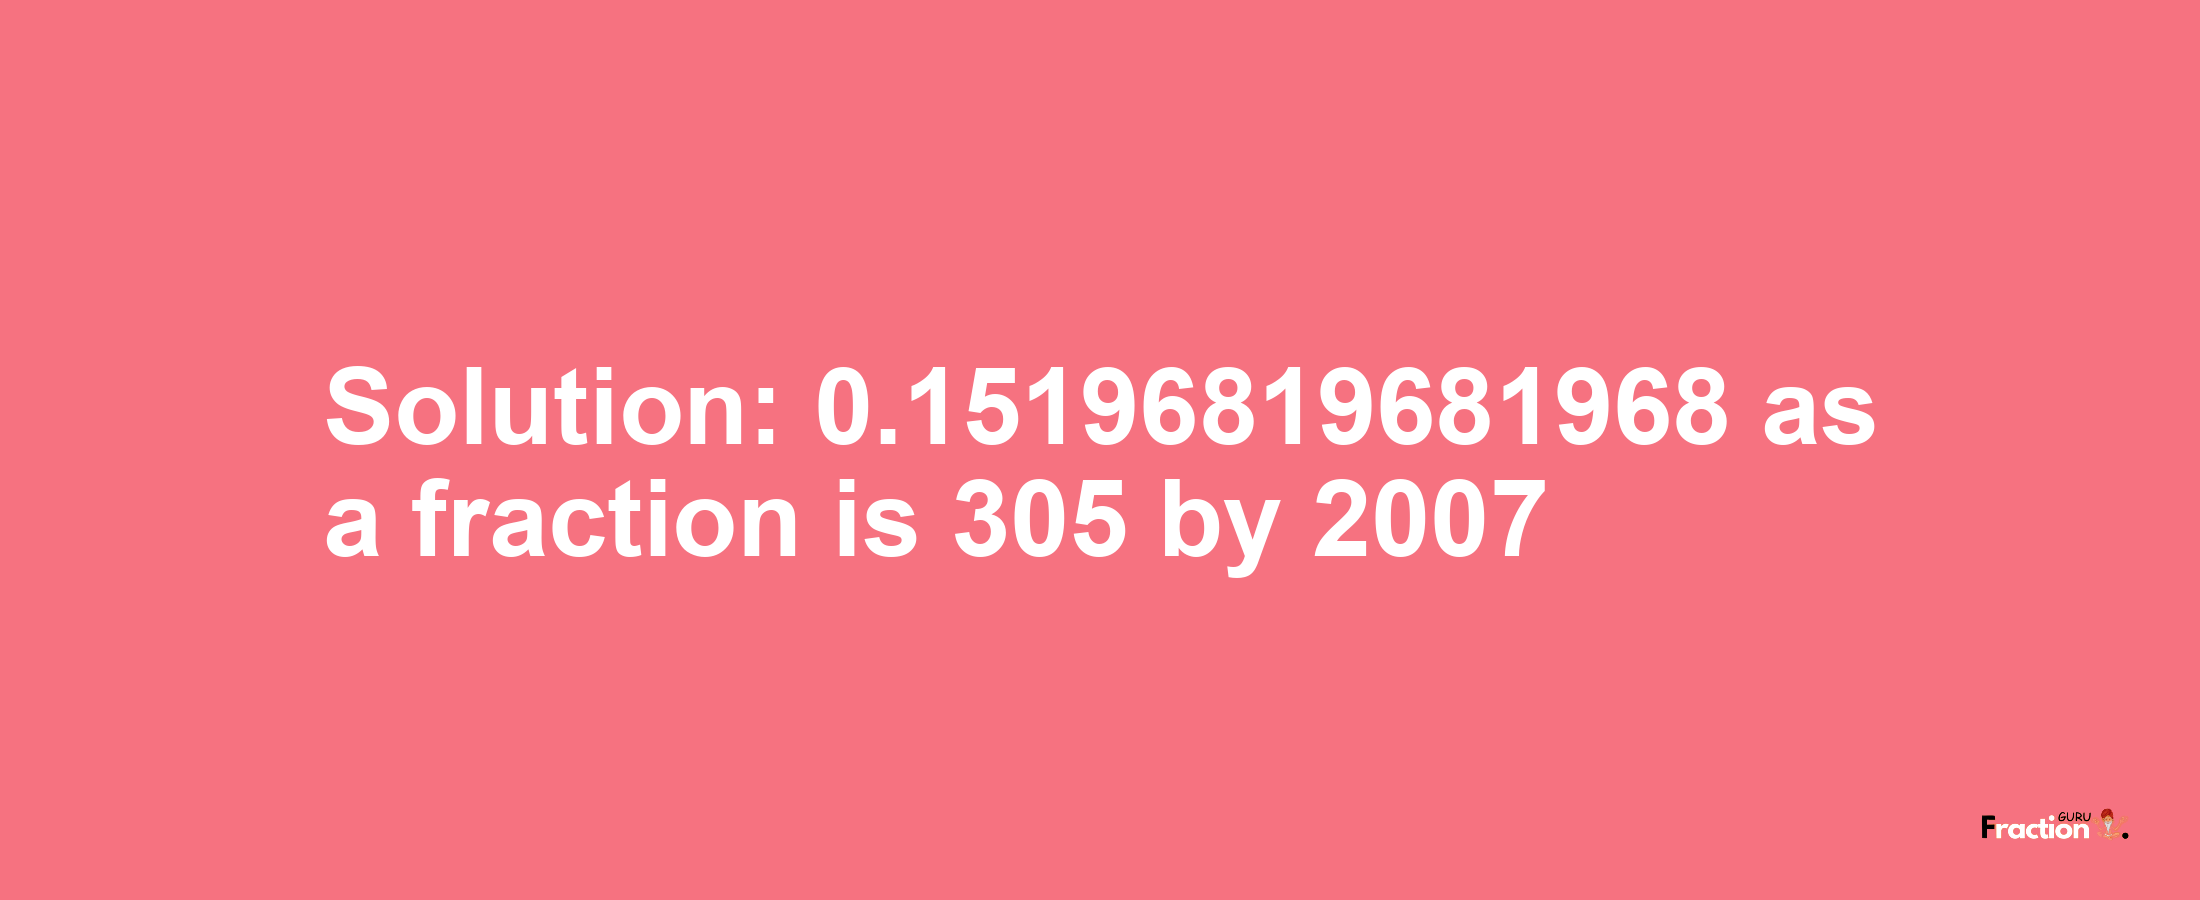 Solution:0.15196819681968 as a fraction is 305/2007